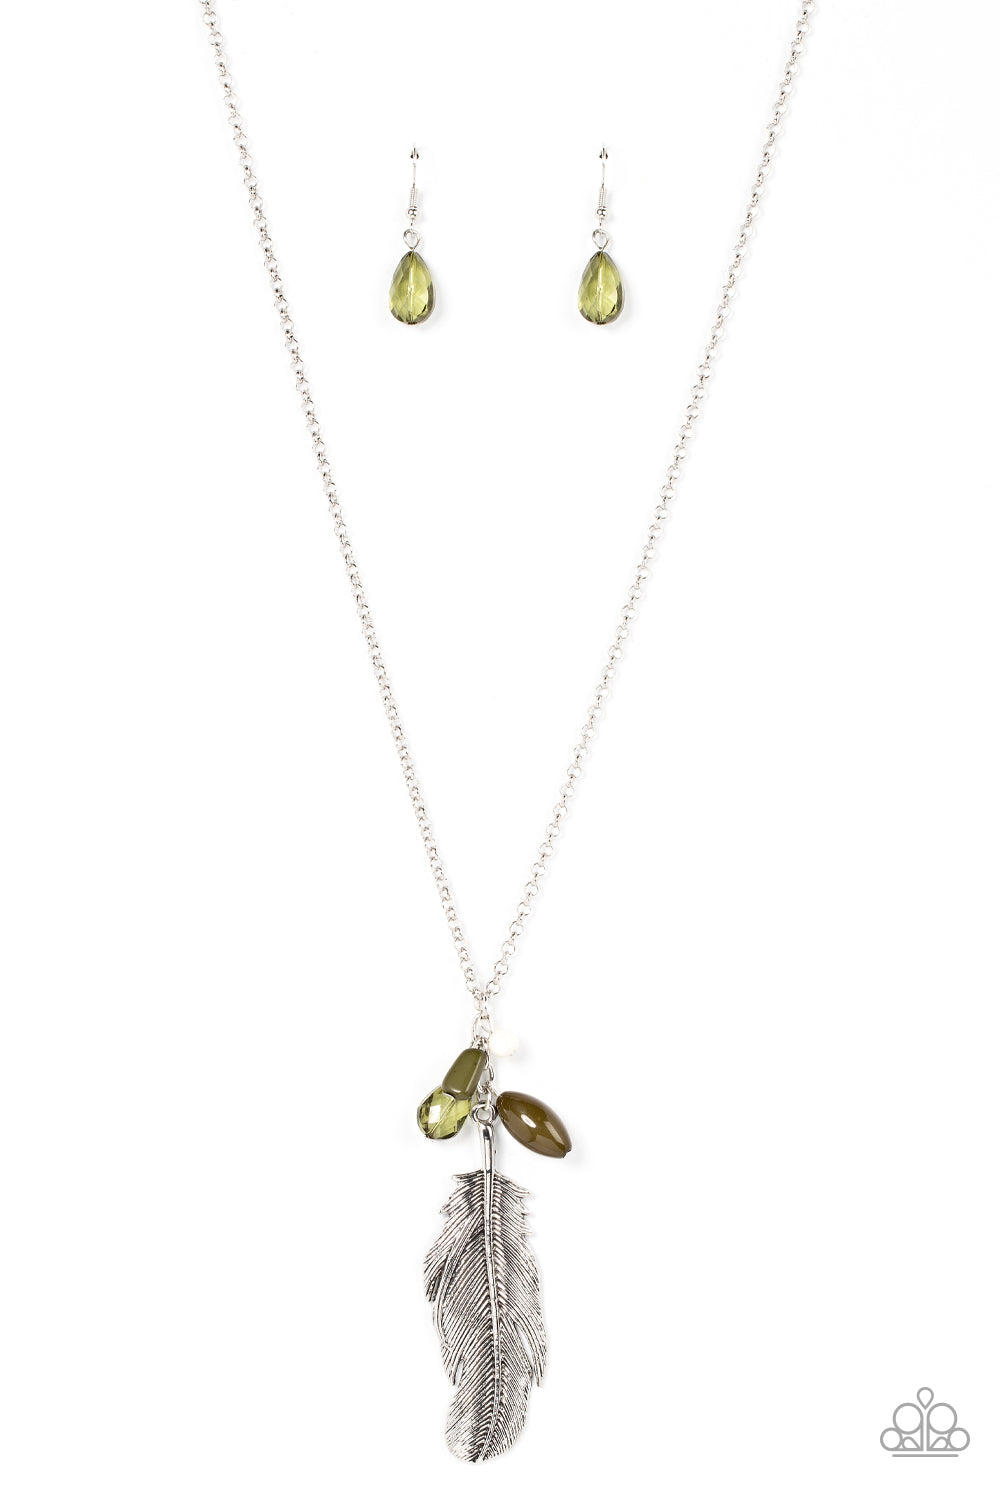 Off the FLOCK Paparazzi Accessories Necklace with Earrings Green